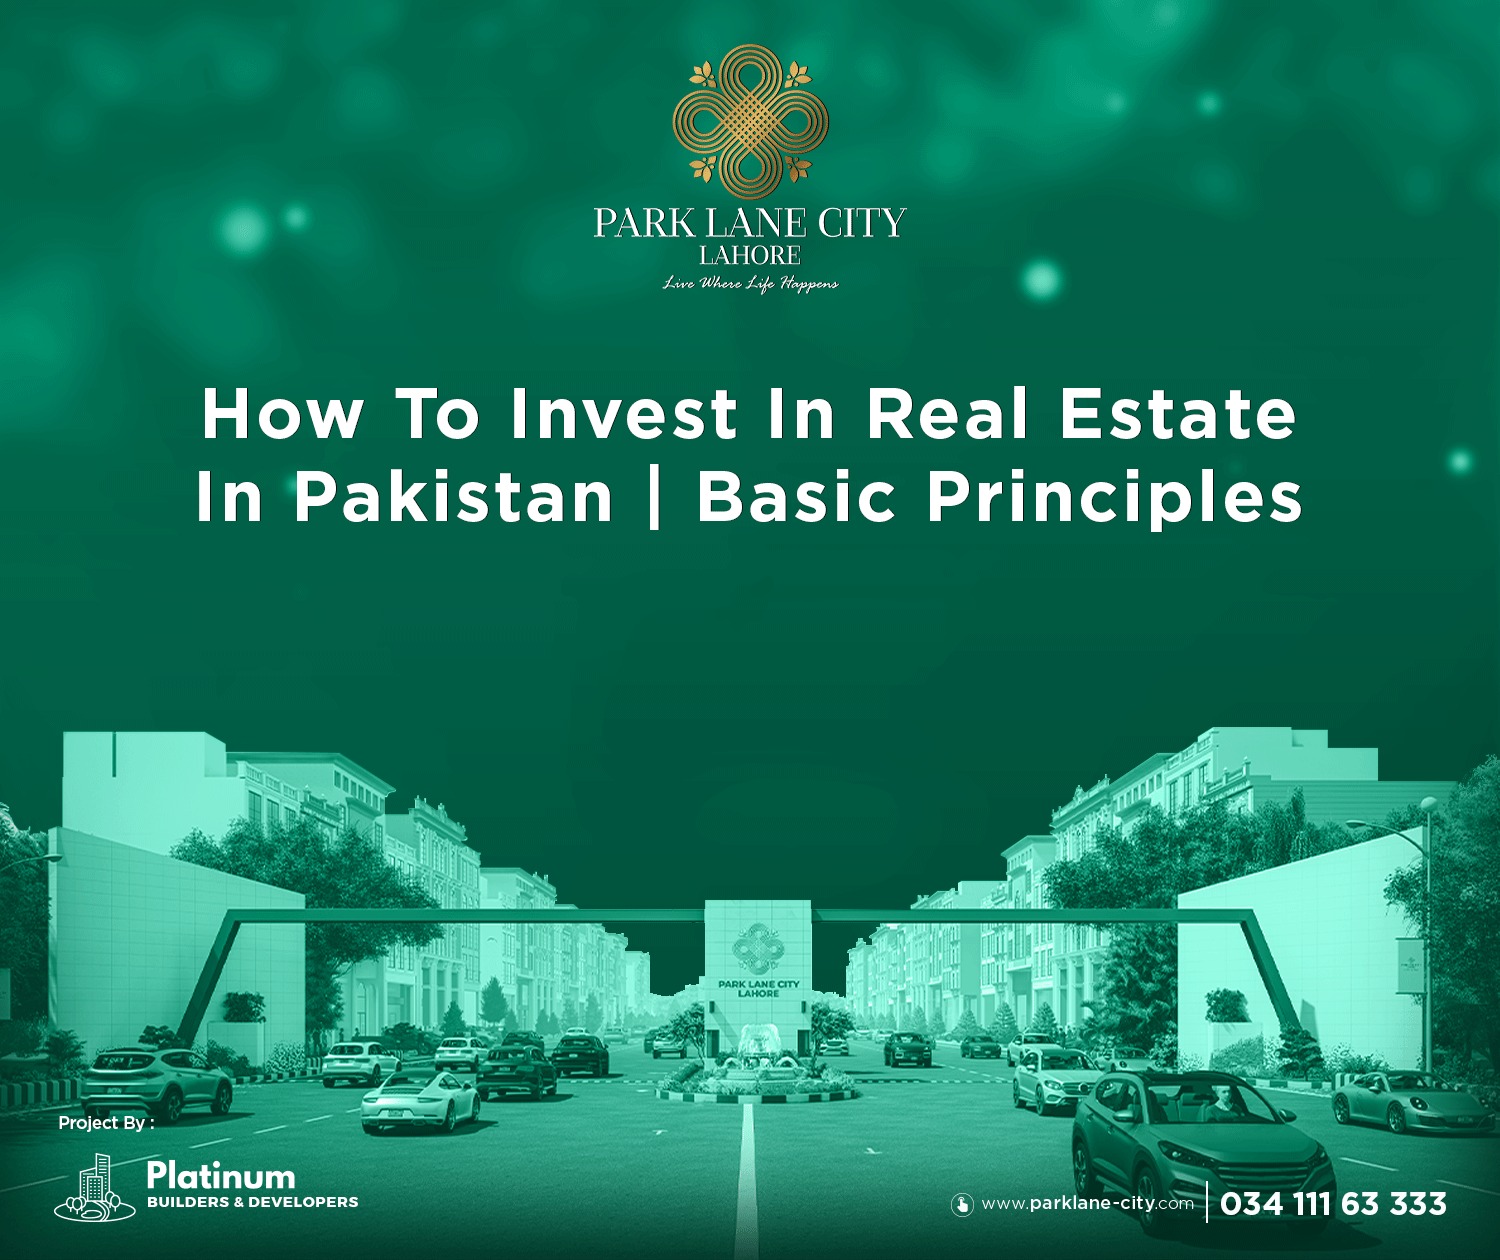 How To Invest In Real Estate In Pakistan